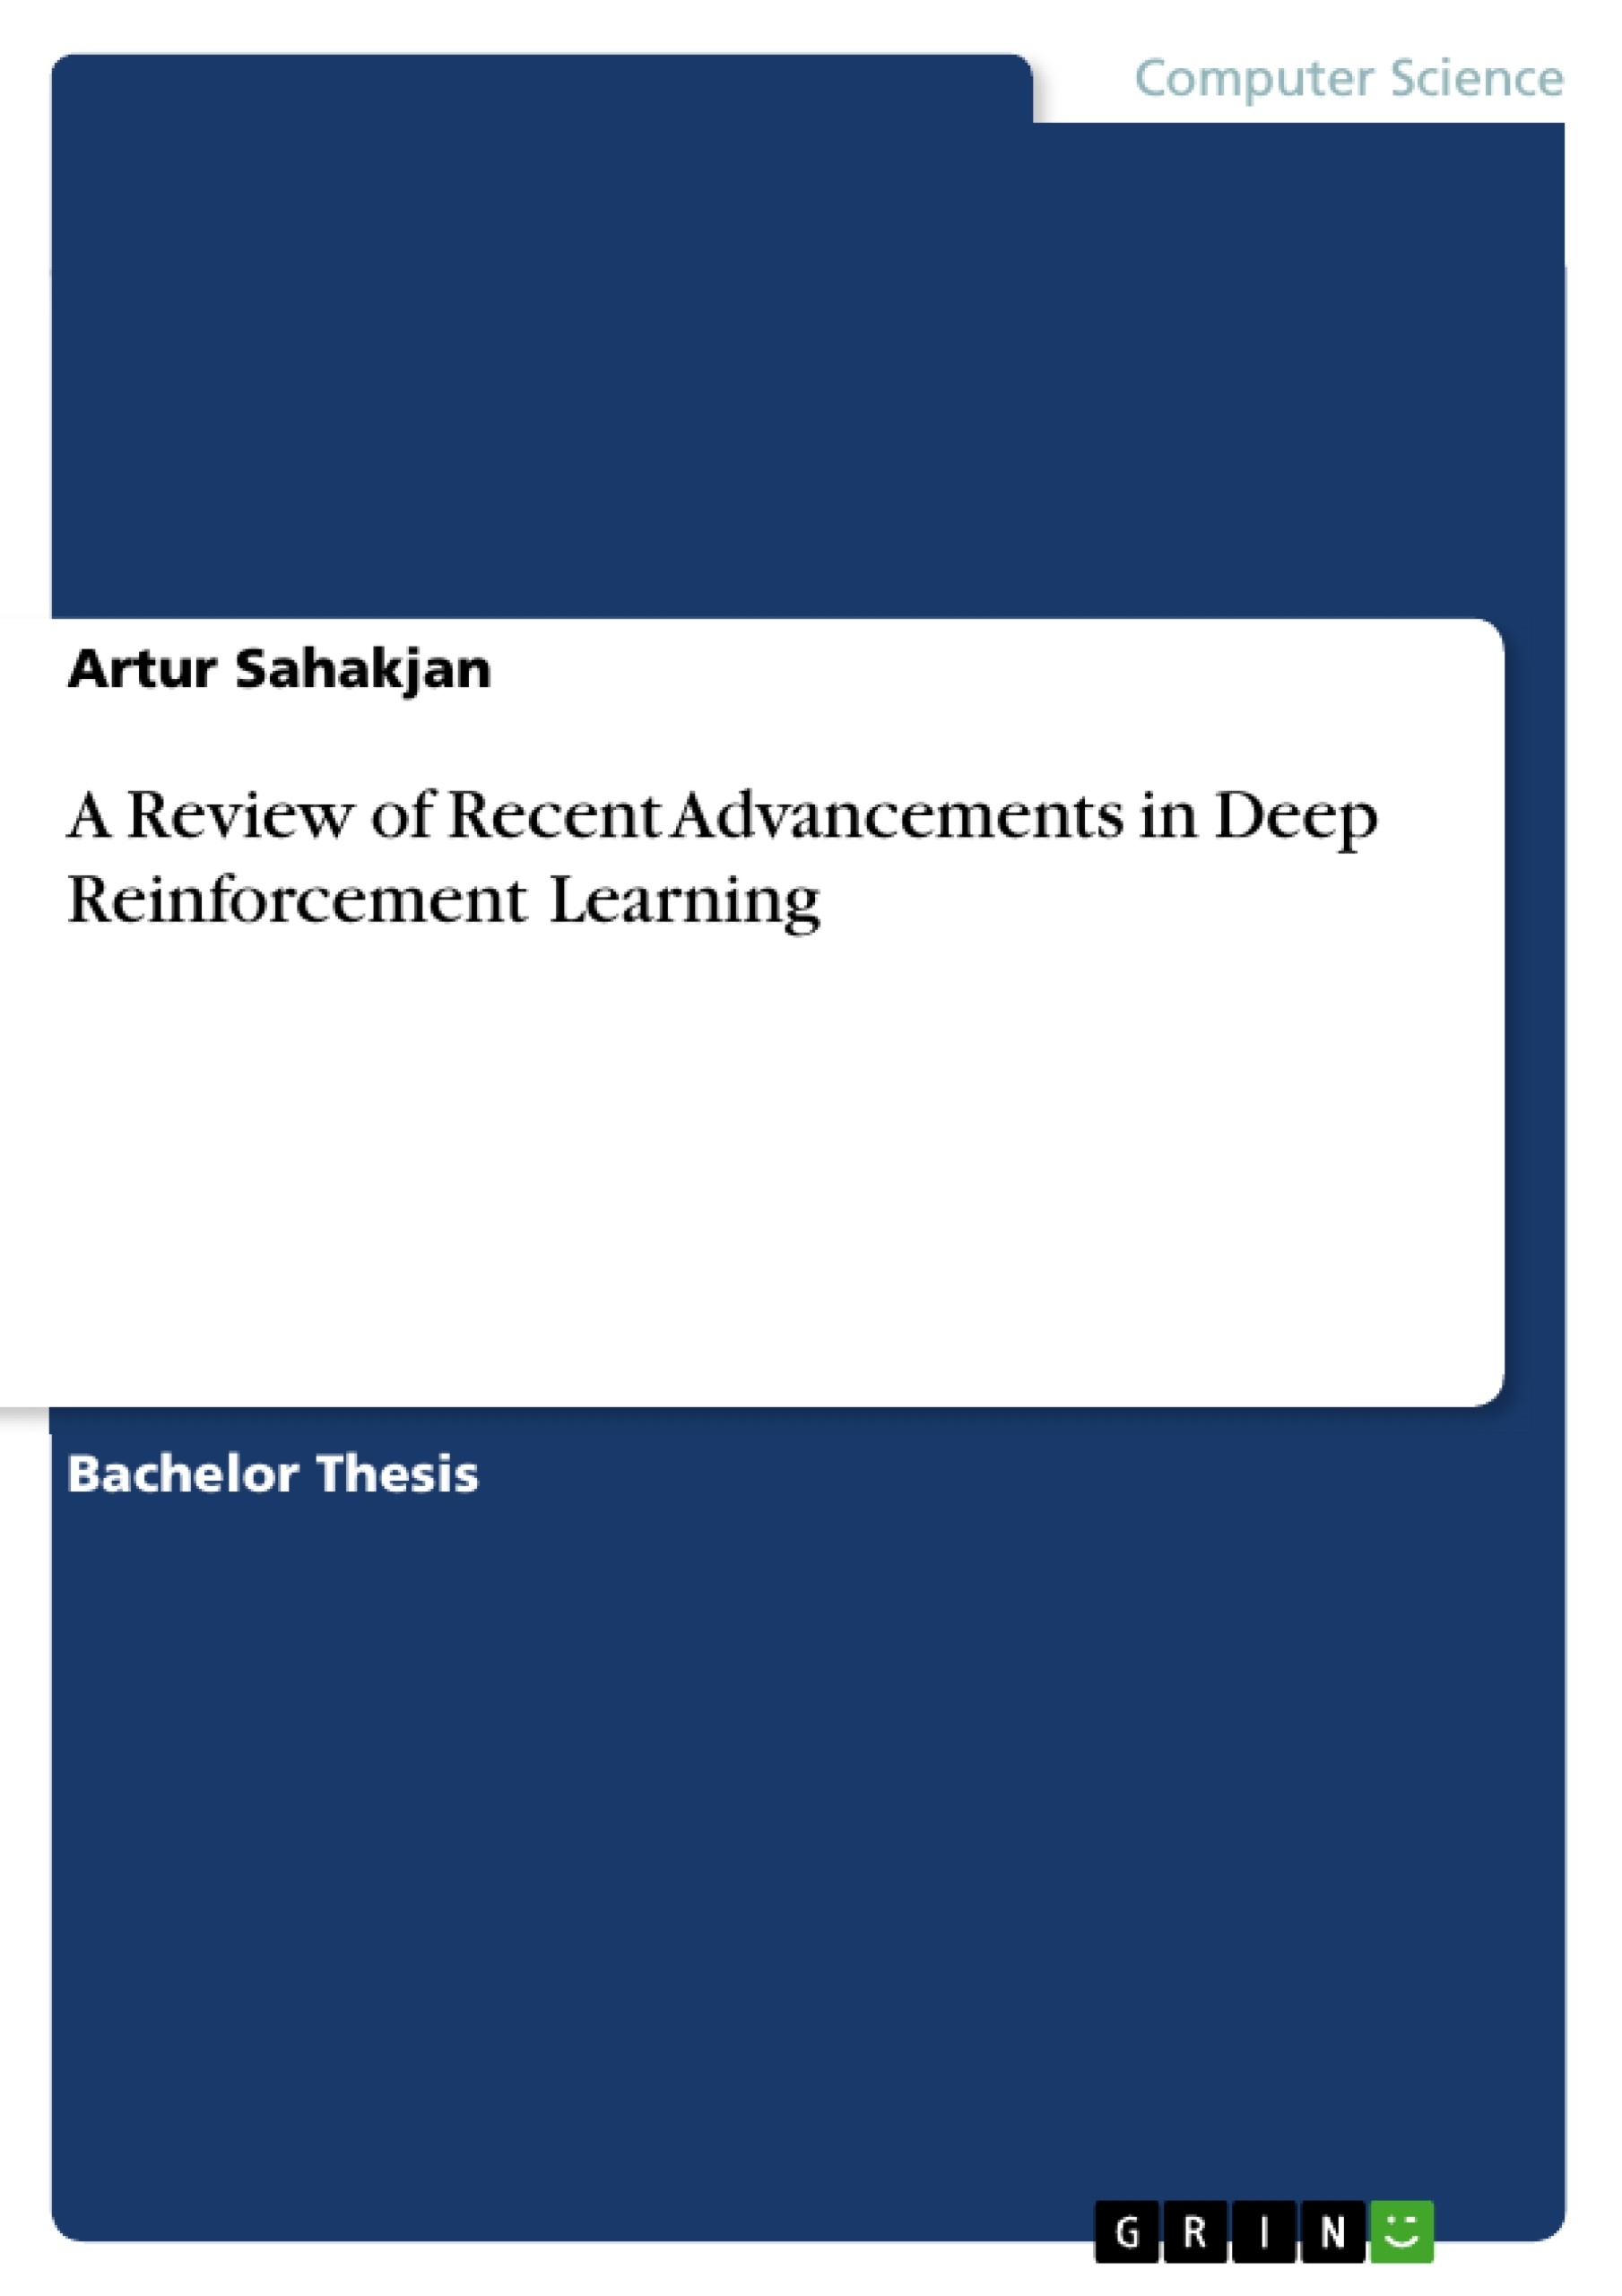 Titre: A Review of Recent Advancements in Deep Reinforcement Learning